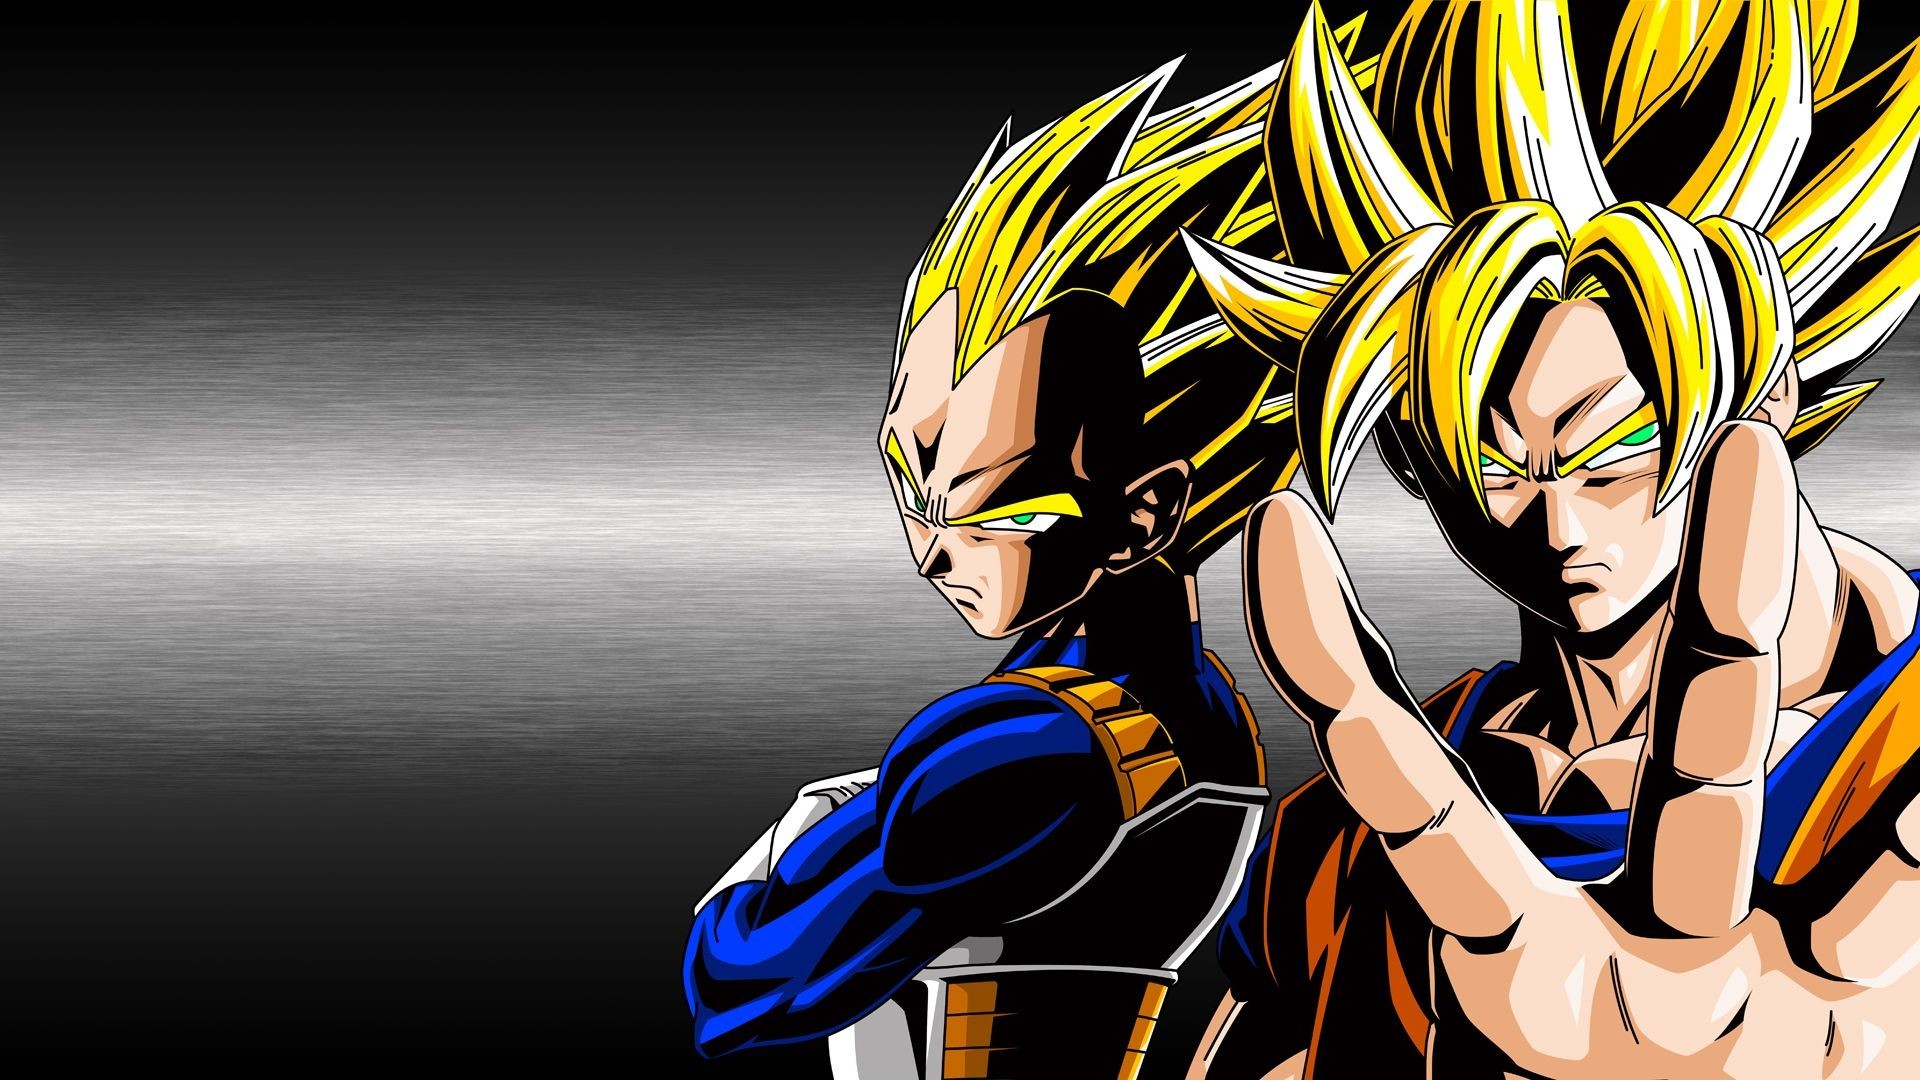 Wallpaper Goku Super Saiyan Desktop with resolution 1920X1080 pixel. You can use this wallpaper as background for your desktop Computer Screensavers, Android or iPhone smartphones